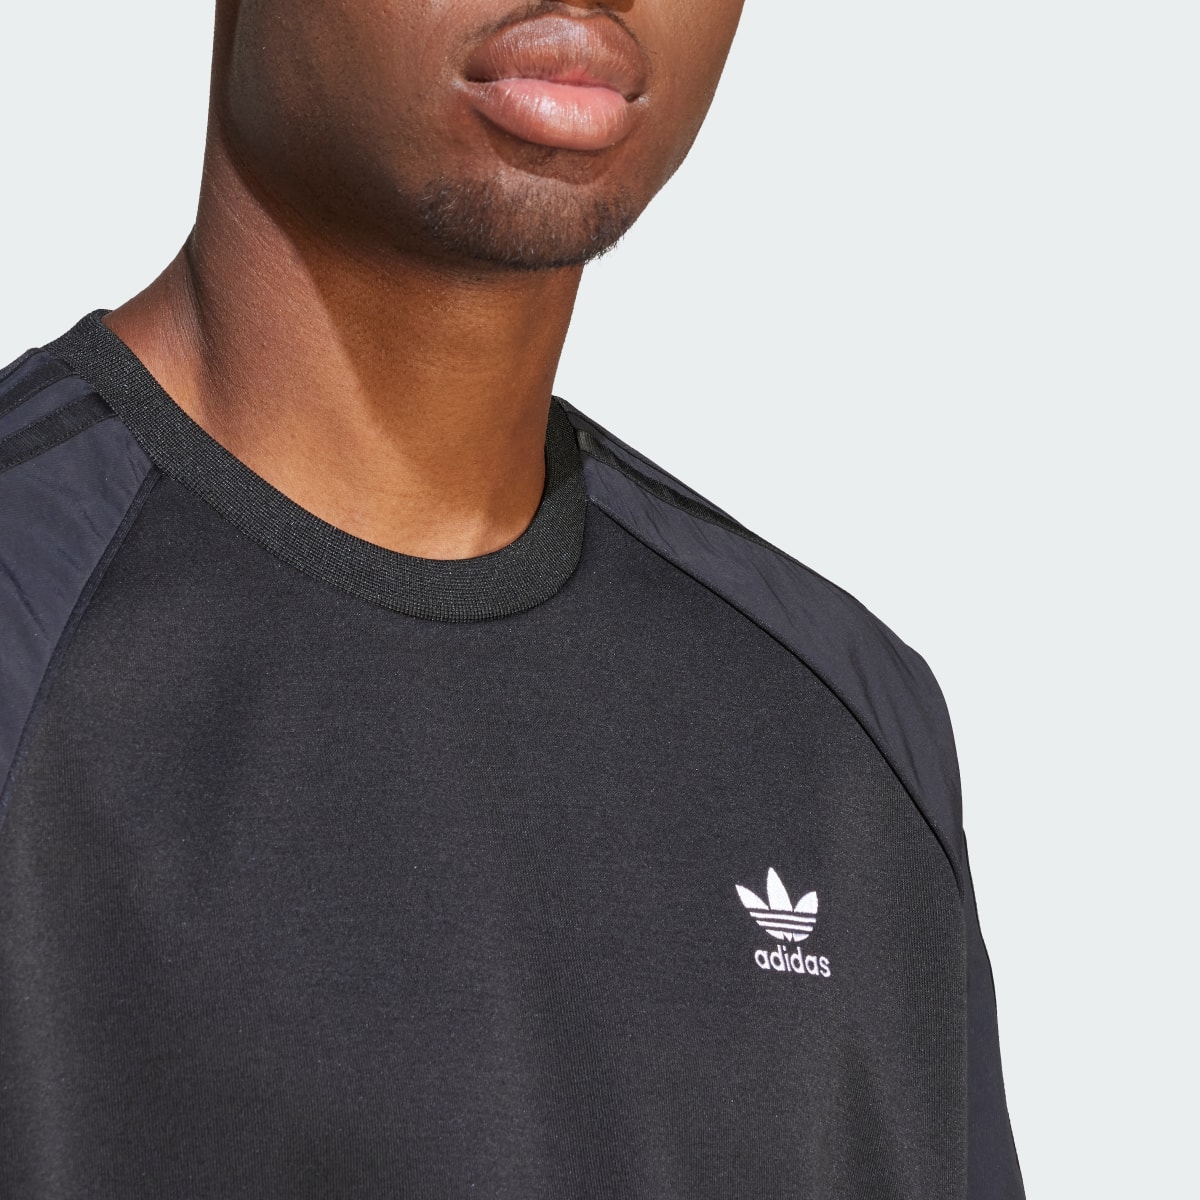 Adidas Adicolor Re-Pro SST Material Mix T-Shirt. 6